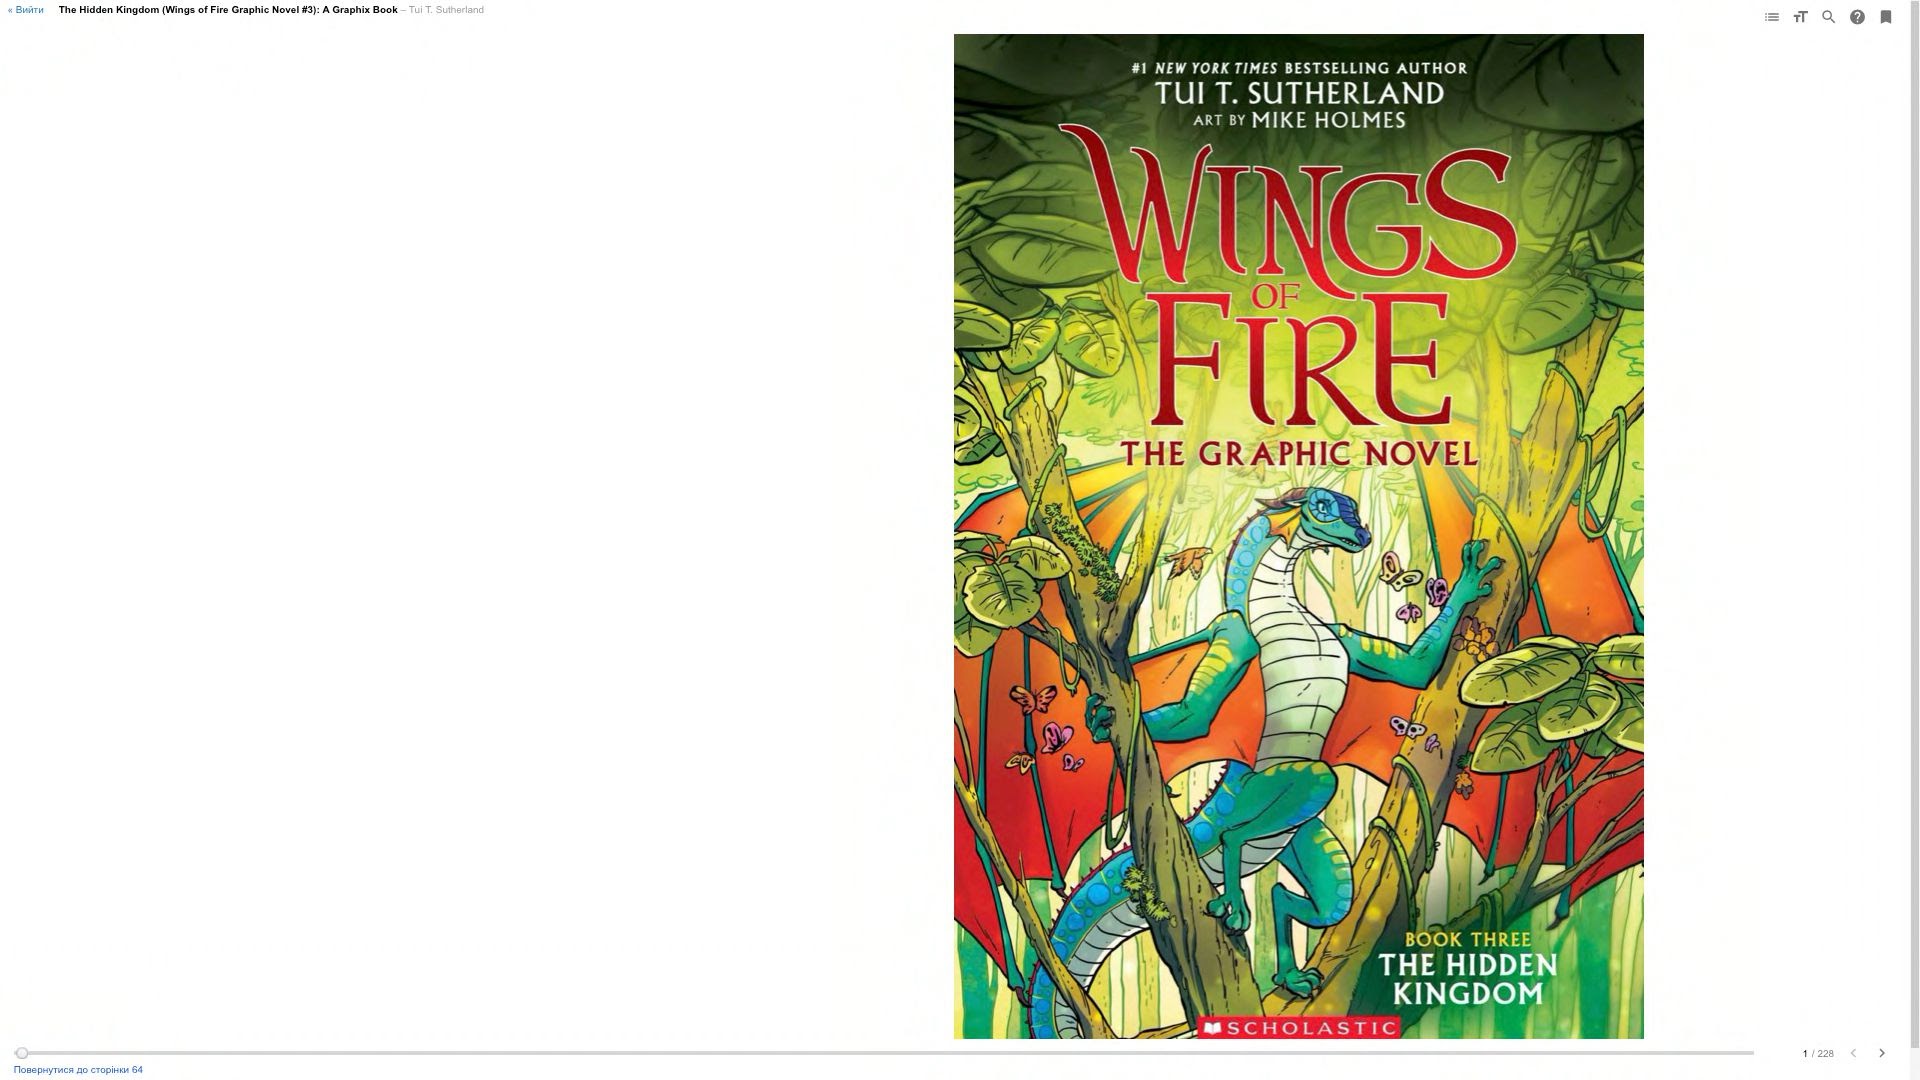 Read online Wings of Fire comic -  Issue # TPB 3 - 1